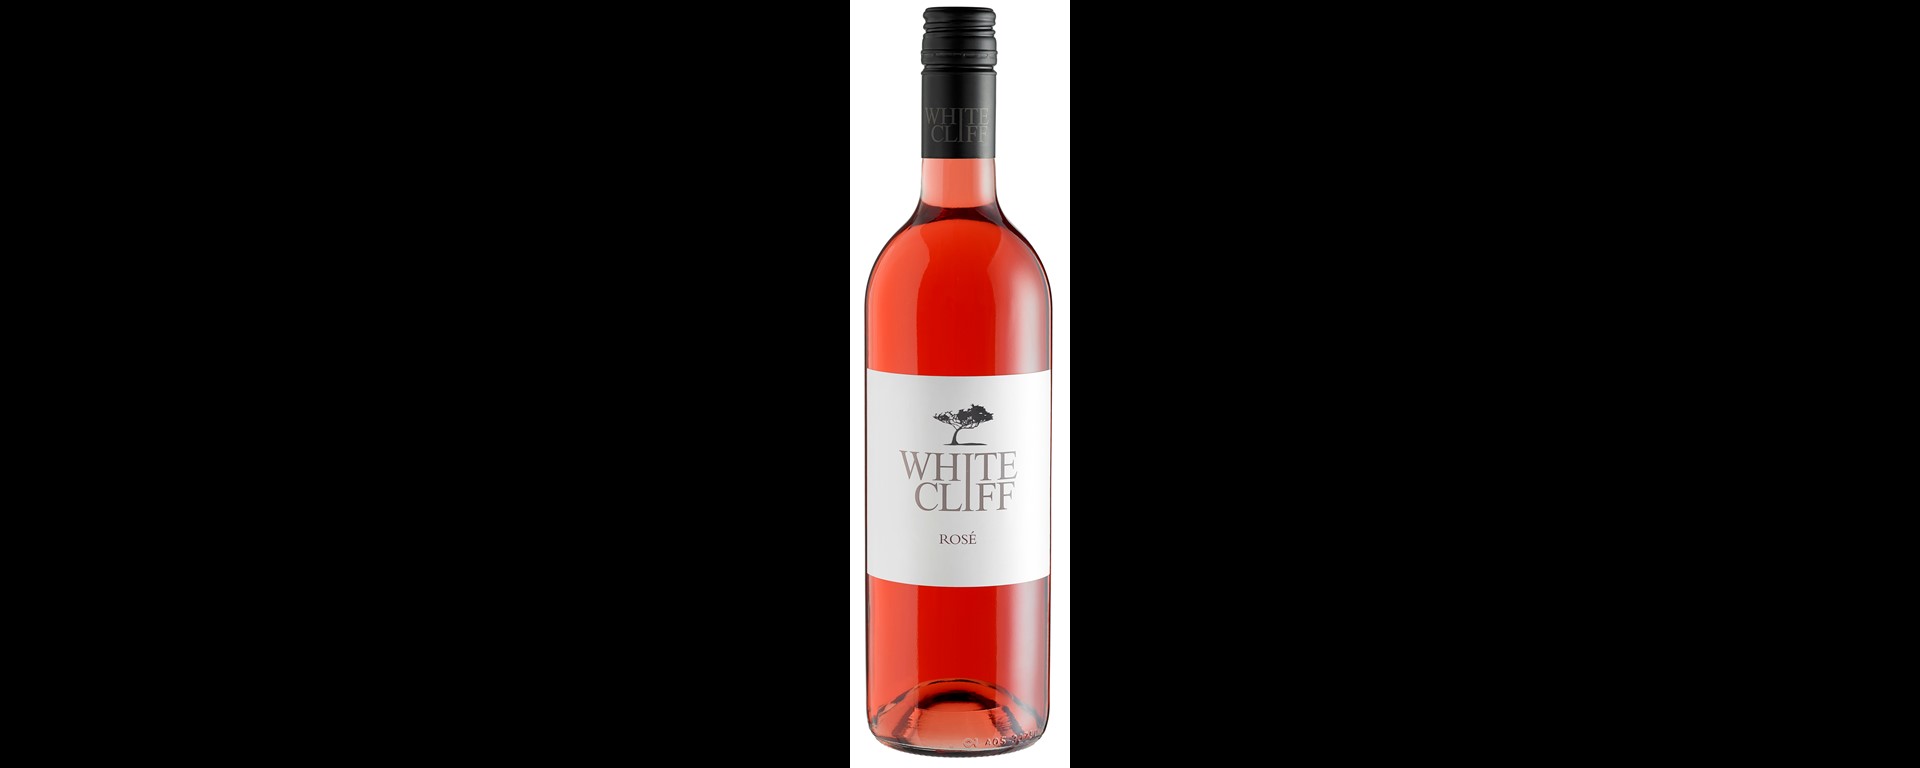 Whitecliff Rose launched for summer